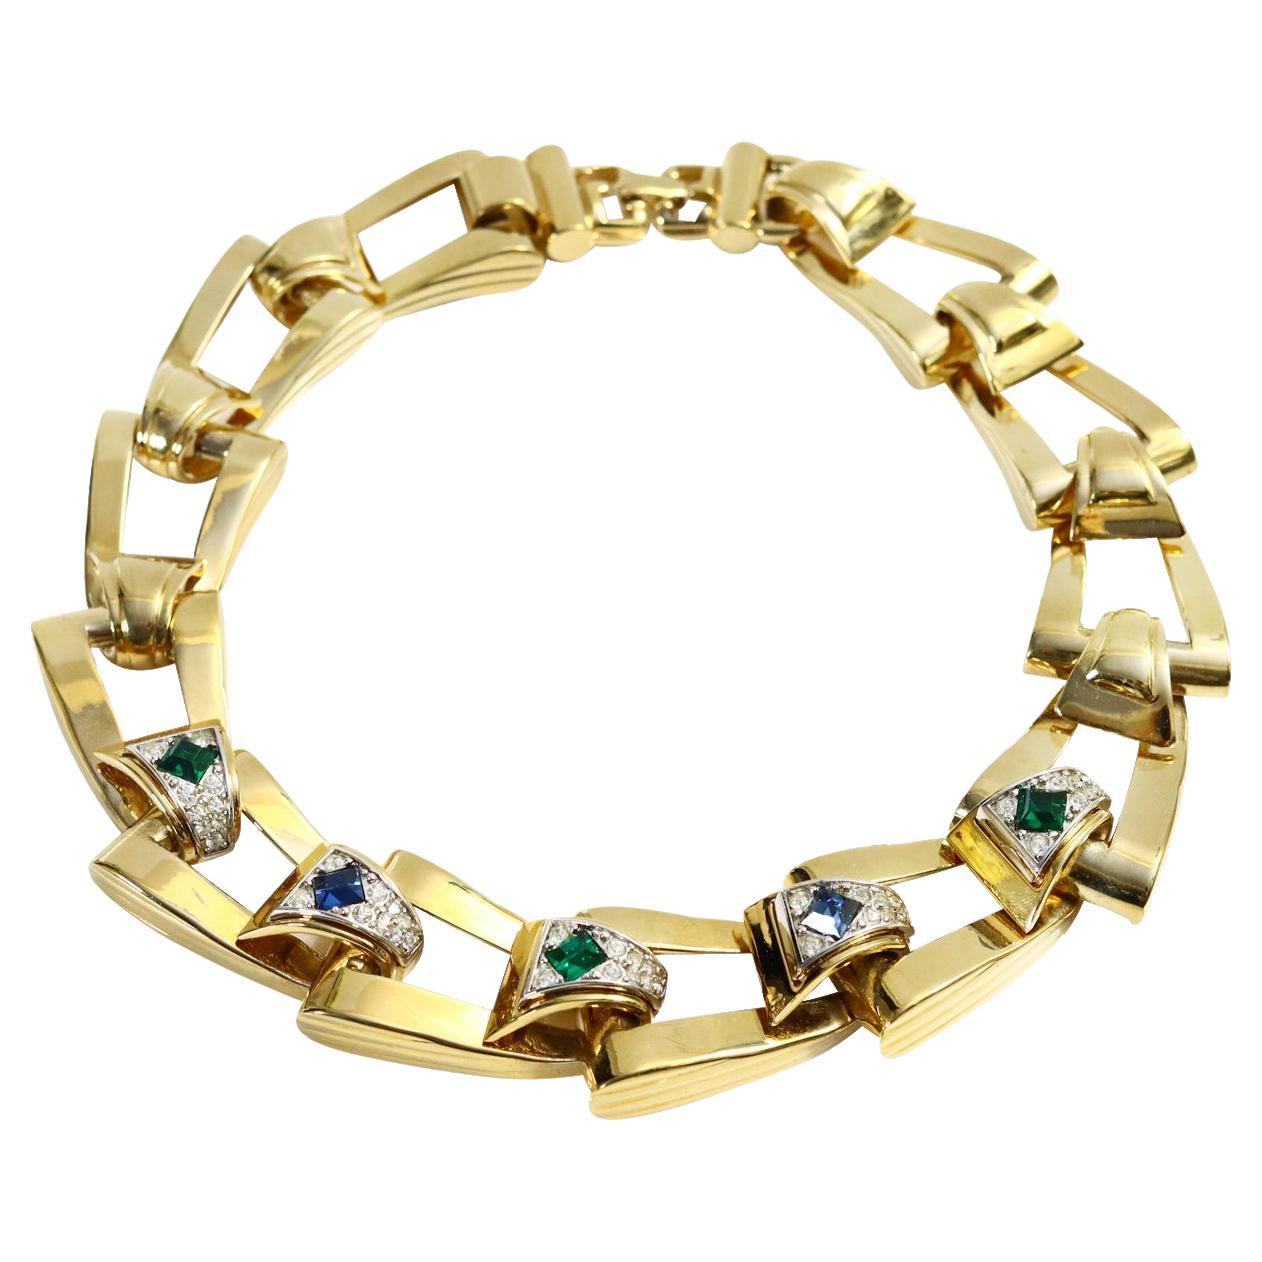 Vintage Givenchy Diamante and Gold Tone Link Necklace Circa 1980s. A majority of the links have a piece of gold with diamante and then a crystal in either blue, green or red in the middle. A heavy and substantial necklace. There is a bracelet on